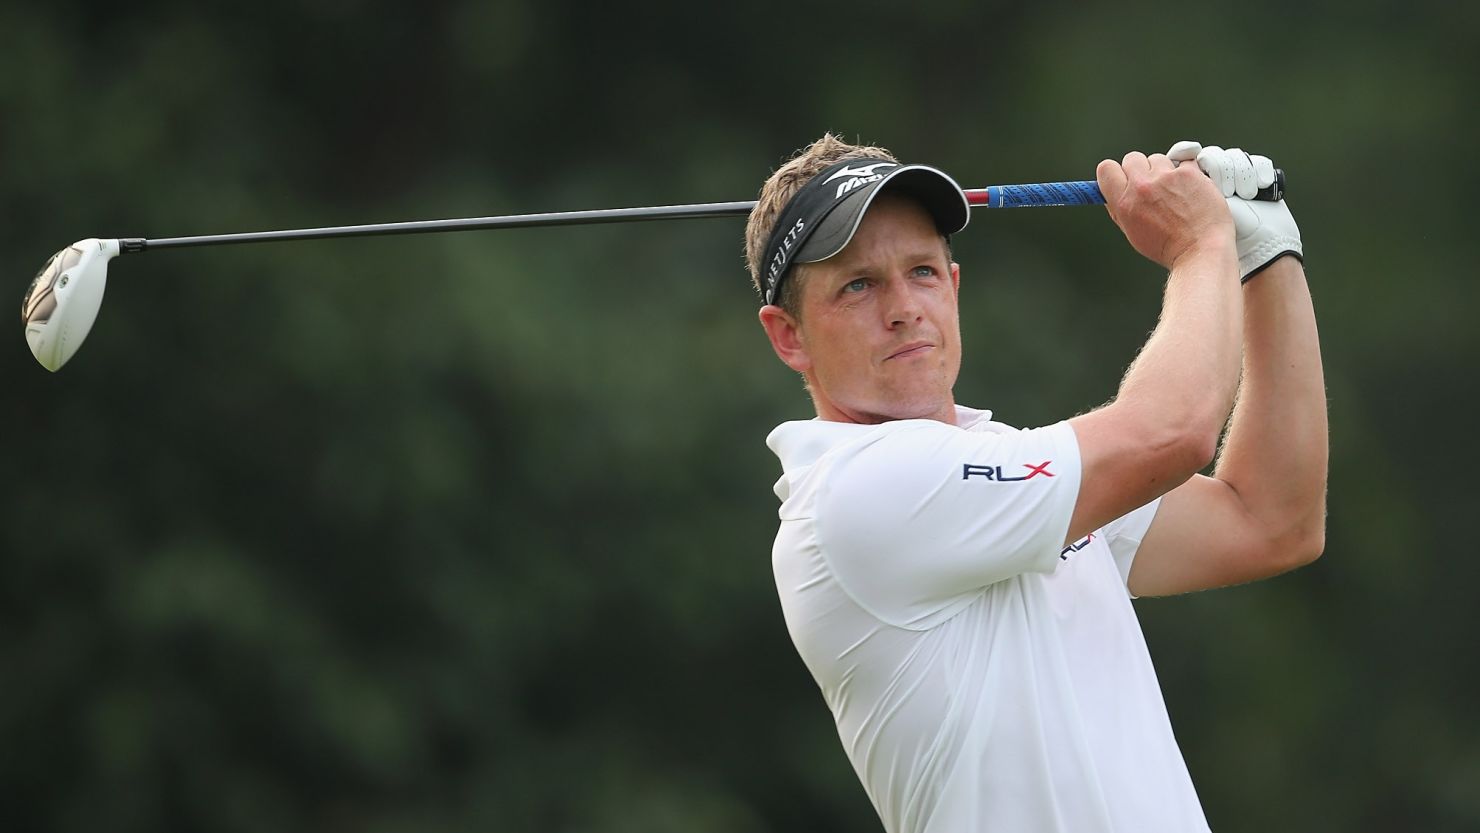 Luke Donald missed the halfway cut for the first time in his professional career at the Malaysia Open.